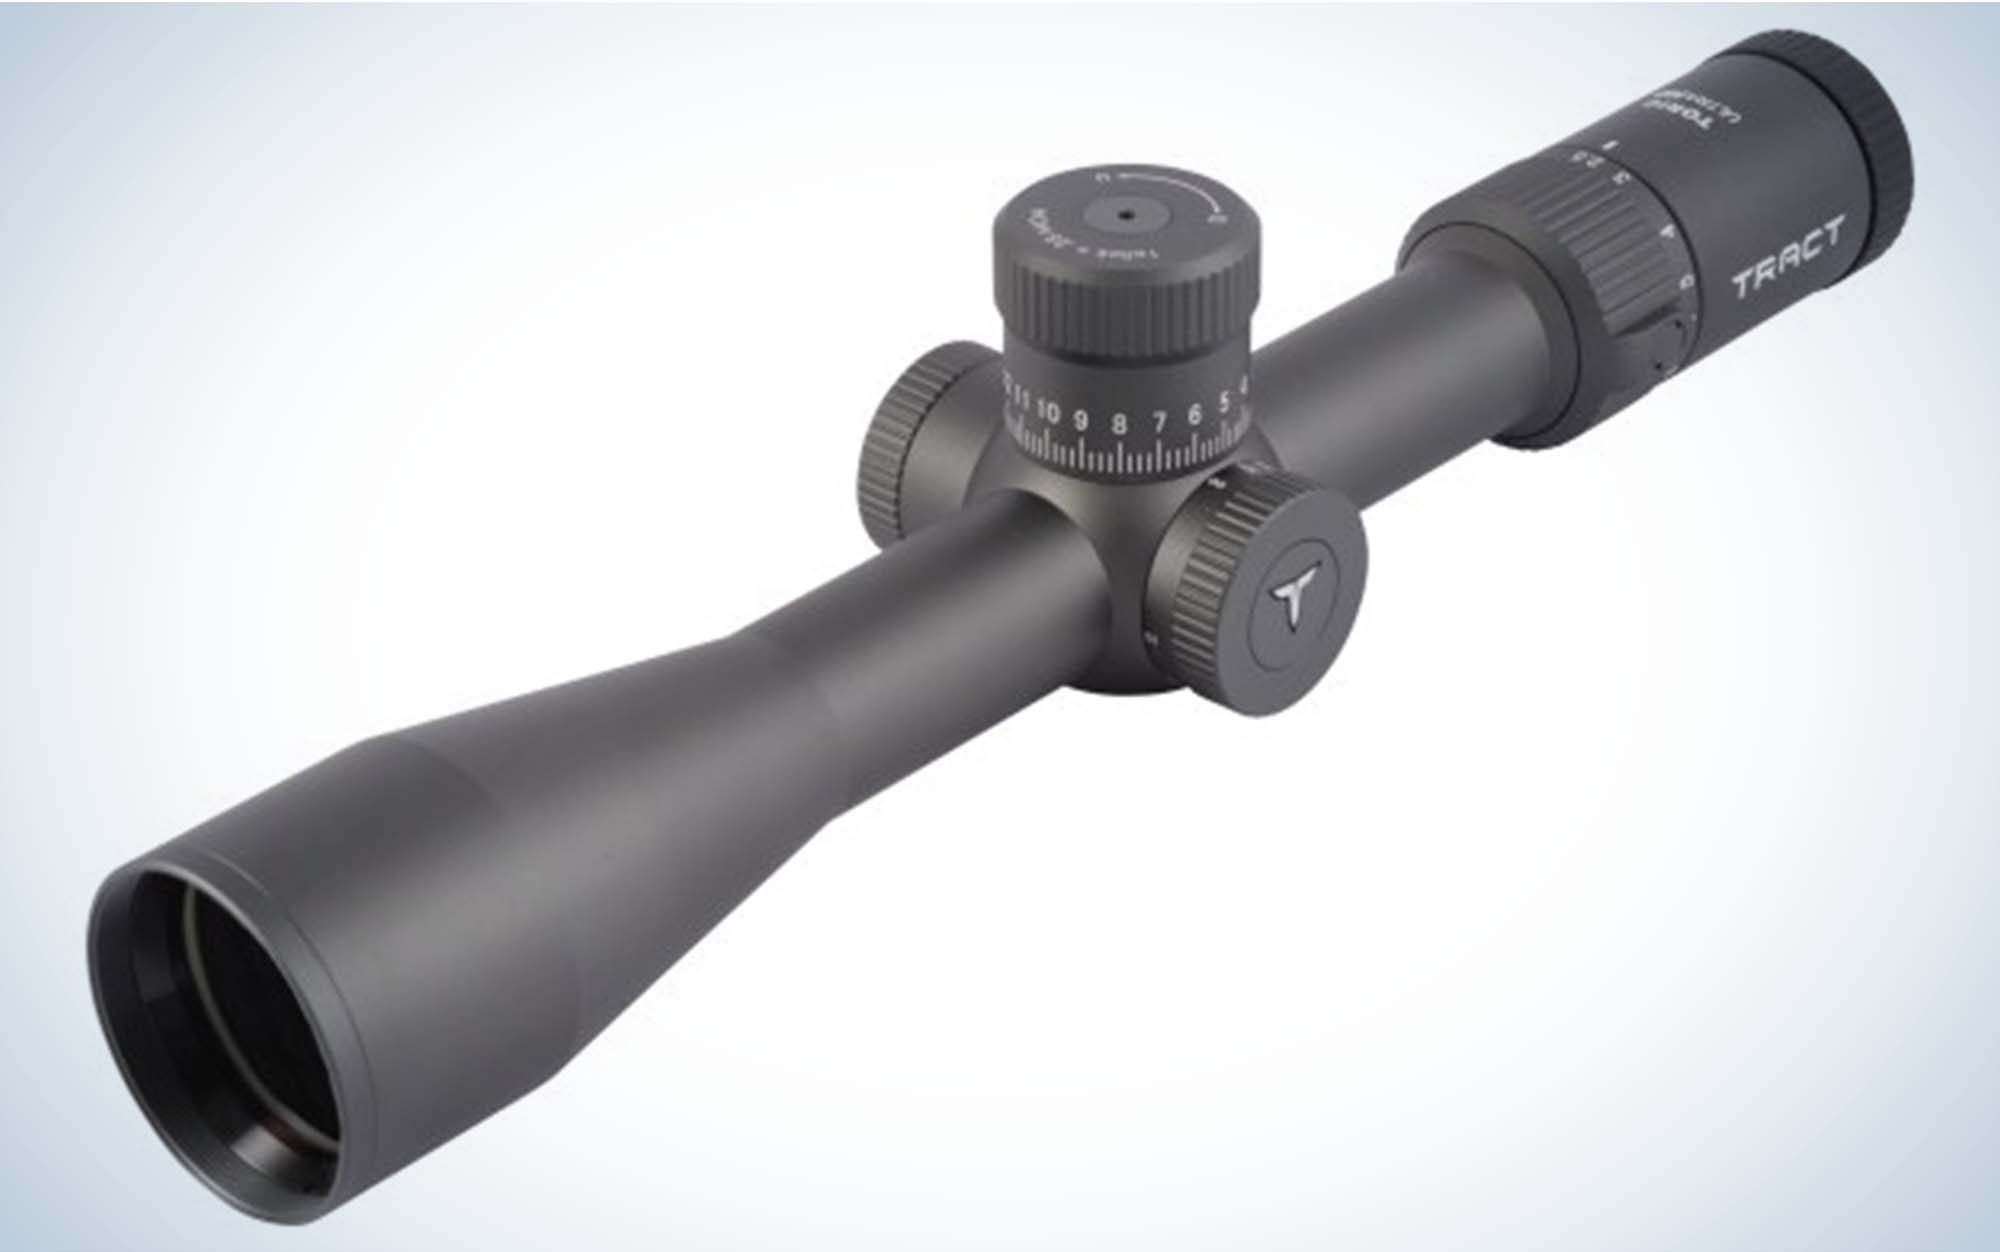 The Tract Toric Ultra HD 2.5-15x44 is the best rifle scope for mule deer.